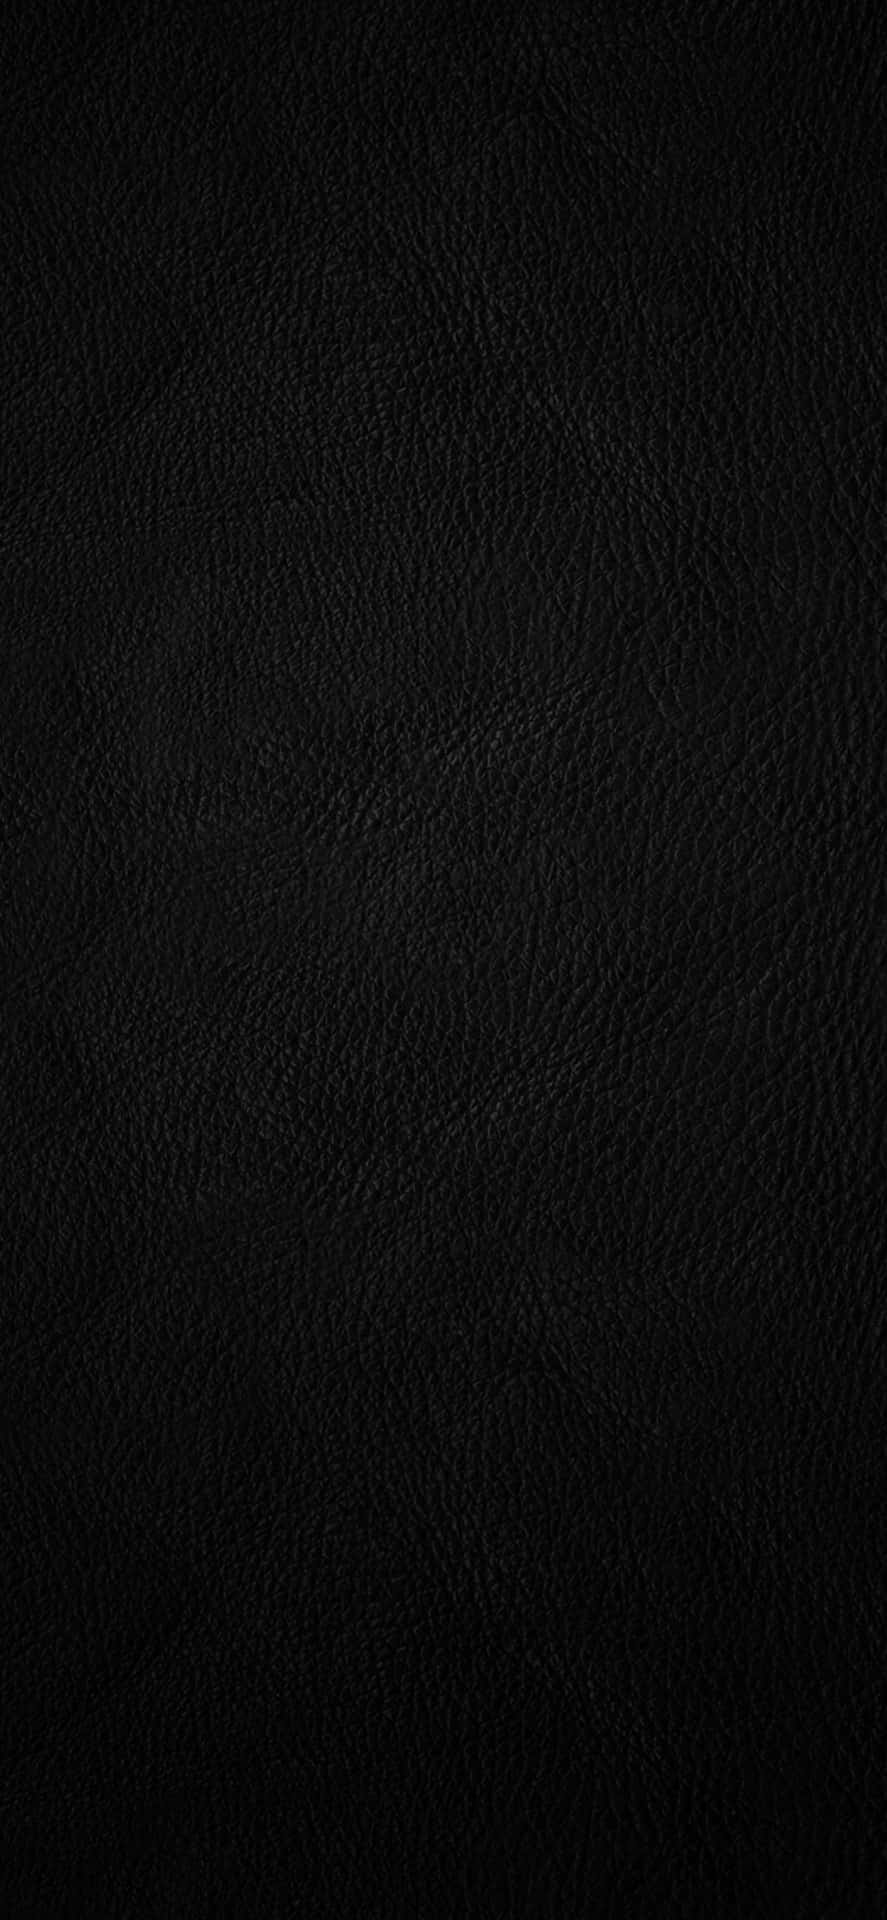 Rich, textured leather background